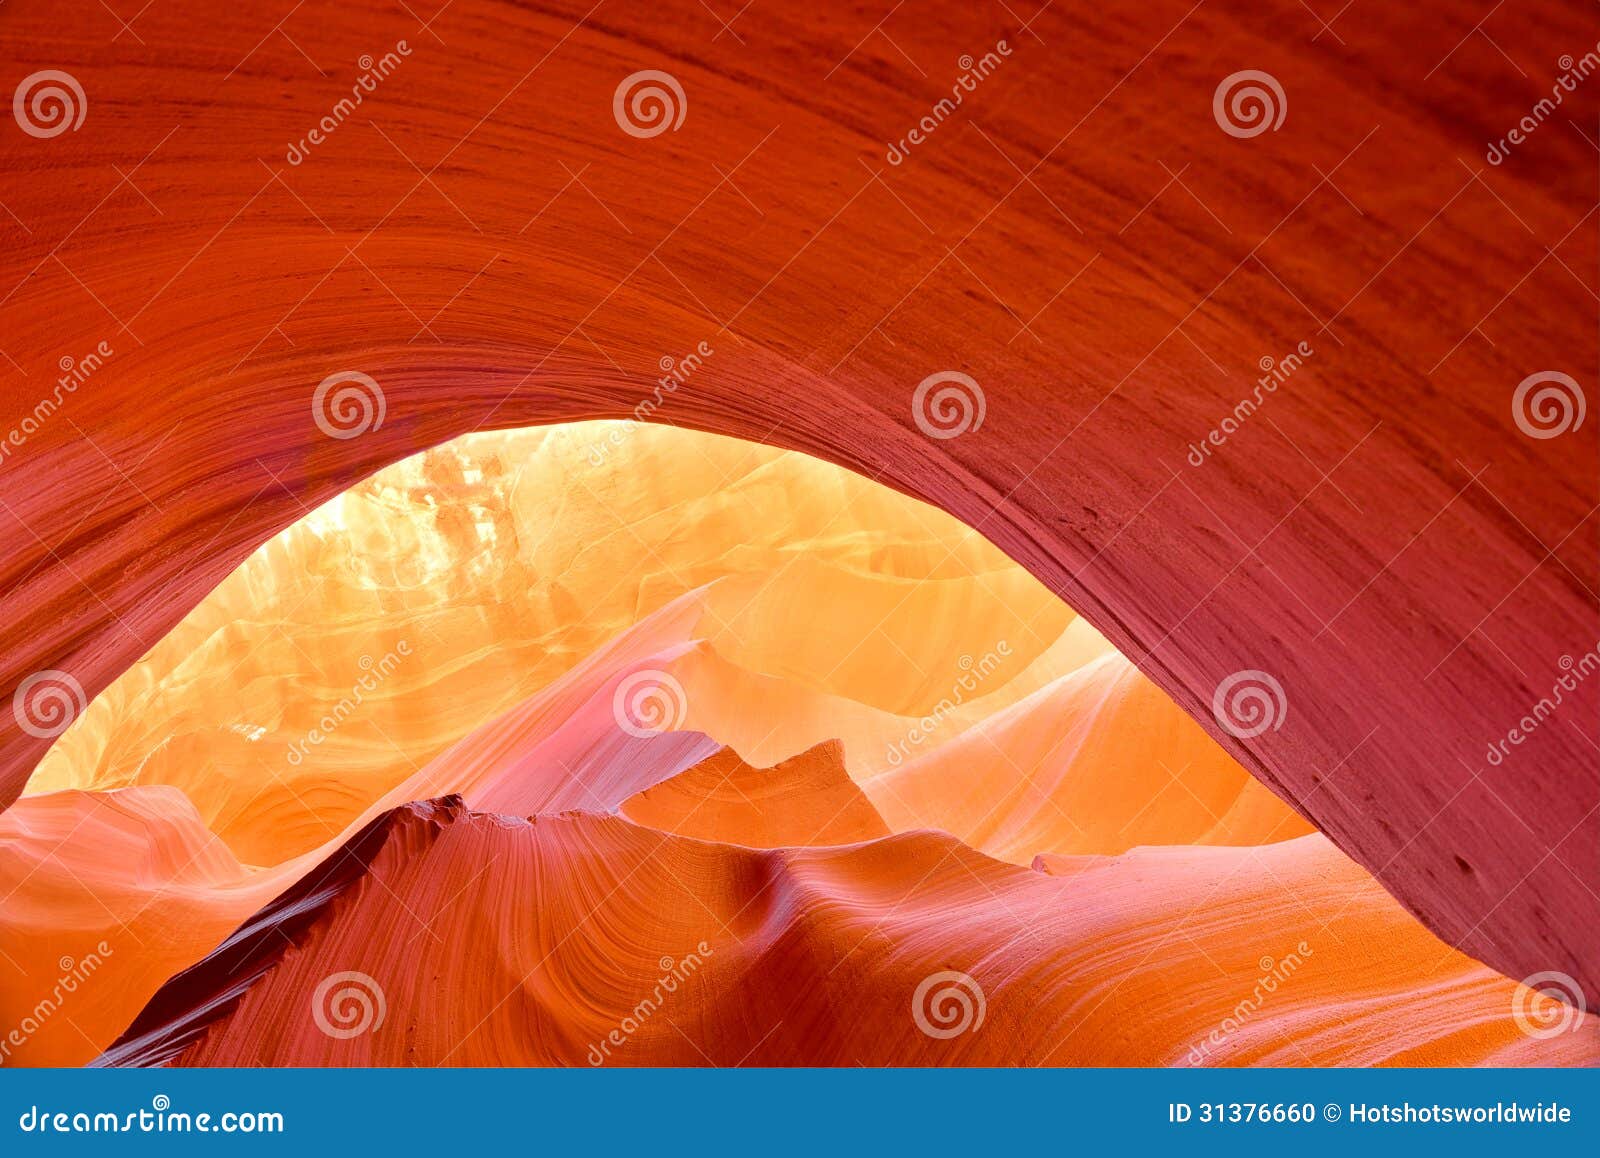 vibrant colors of eroded sandstone rock in slot canyon, antelope